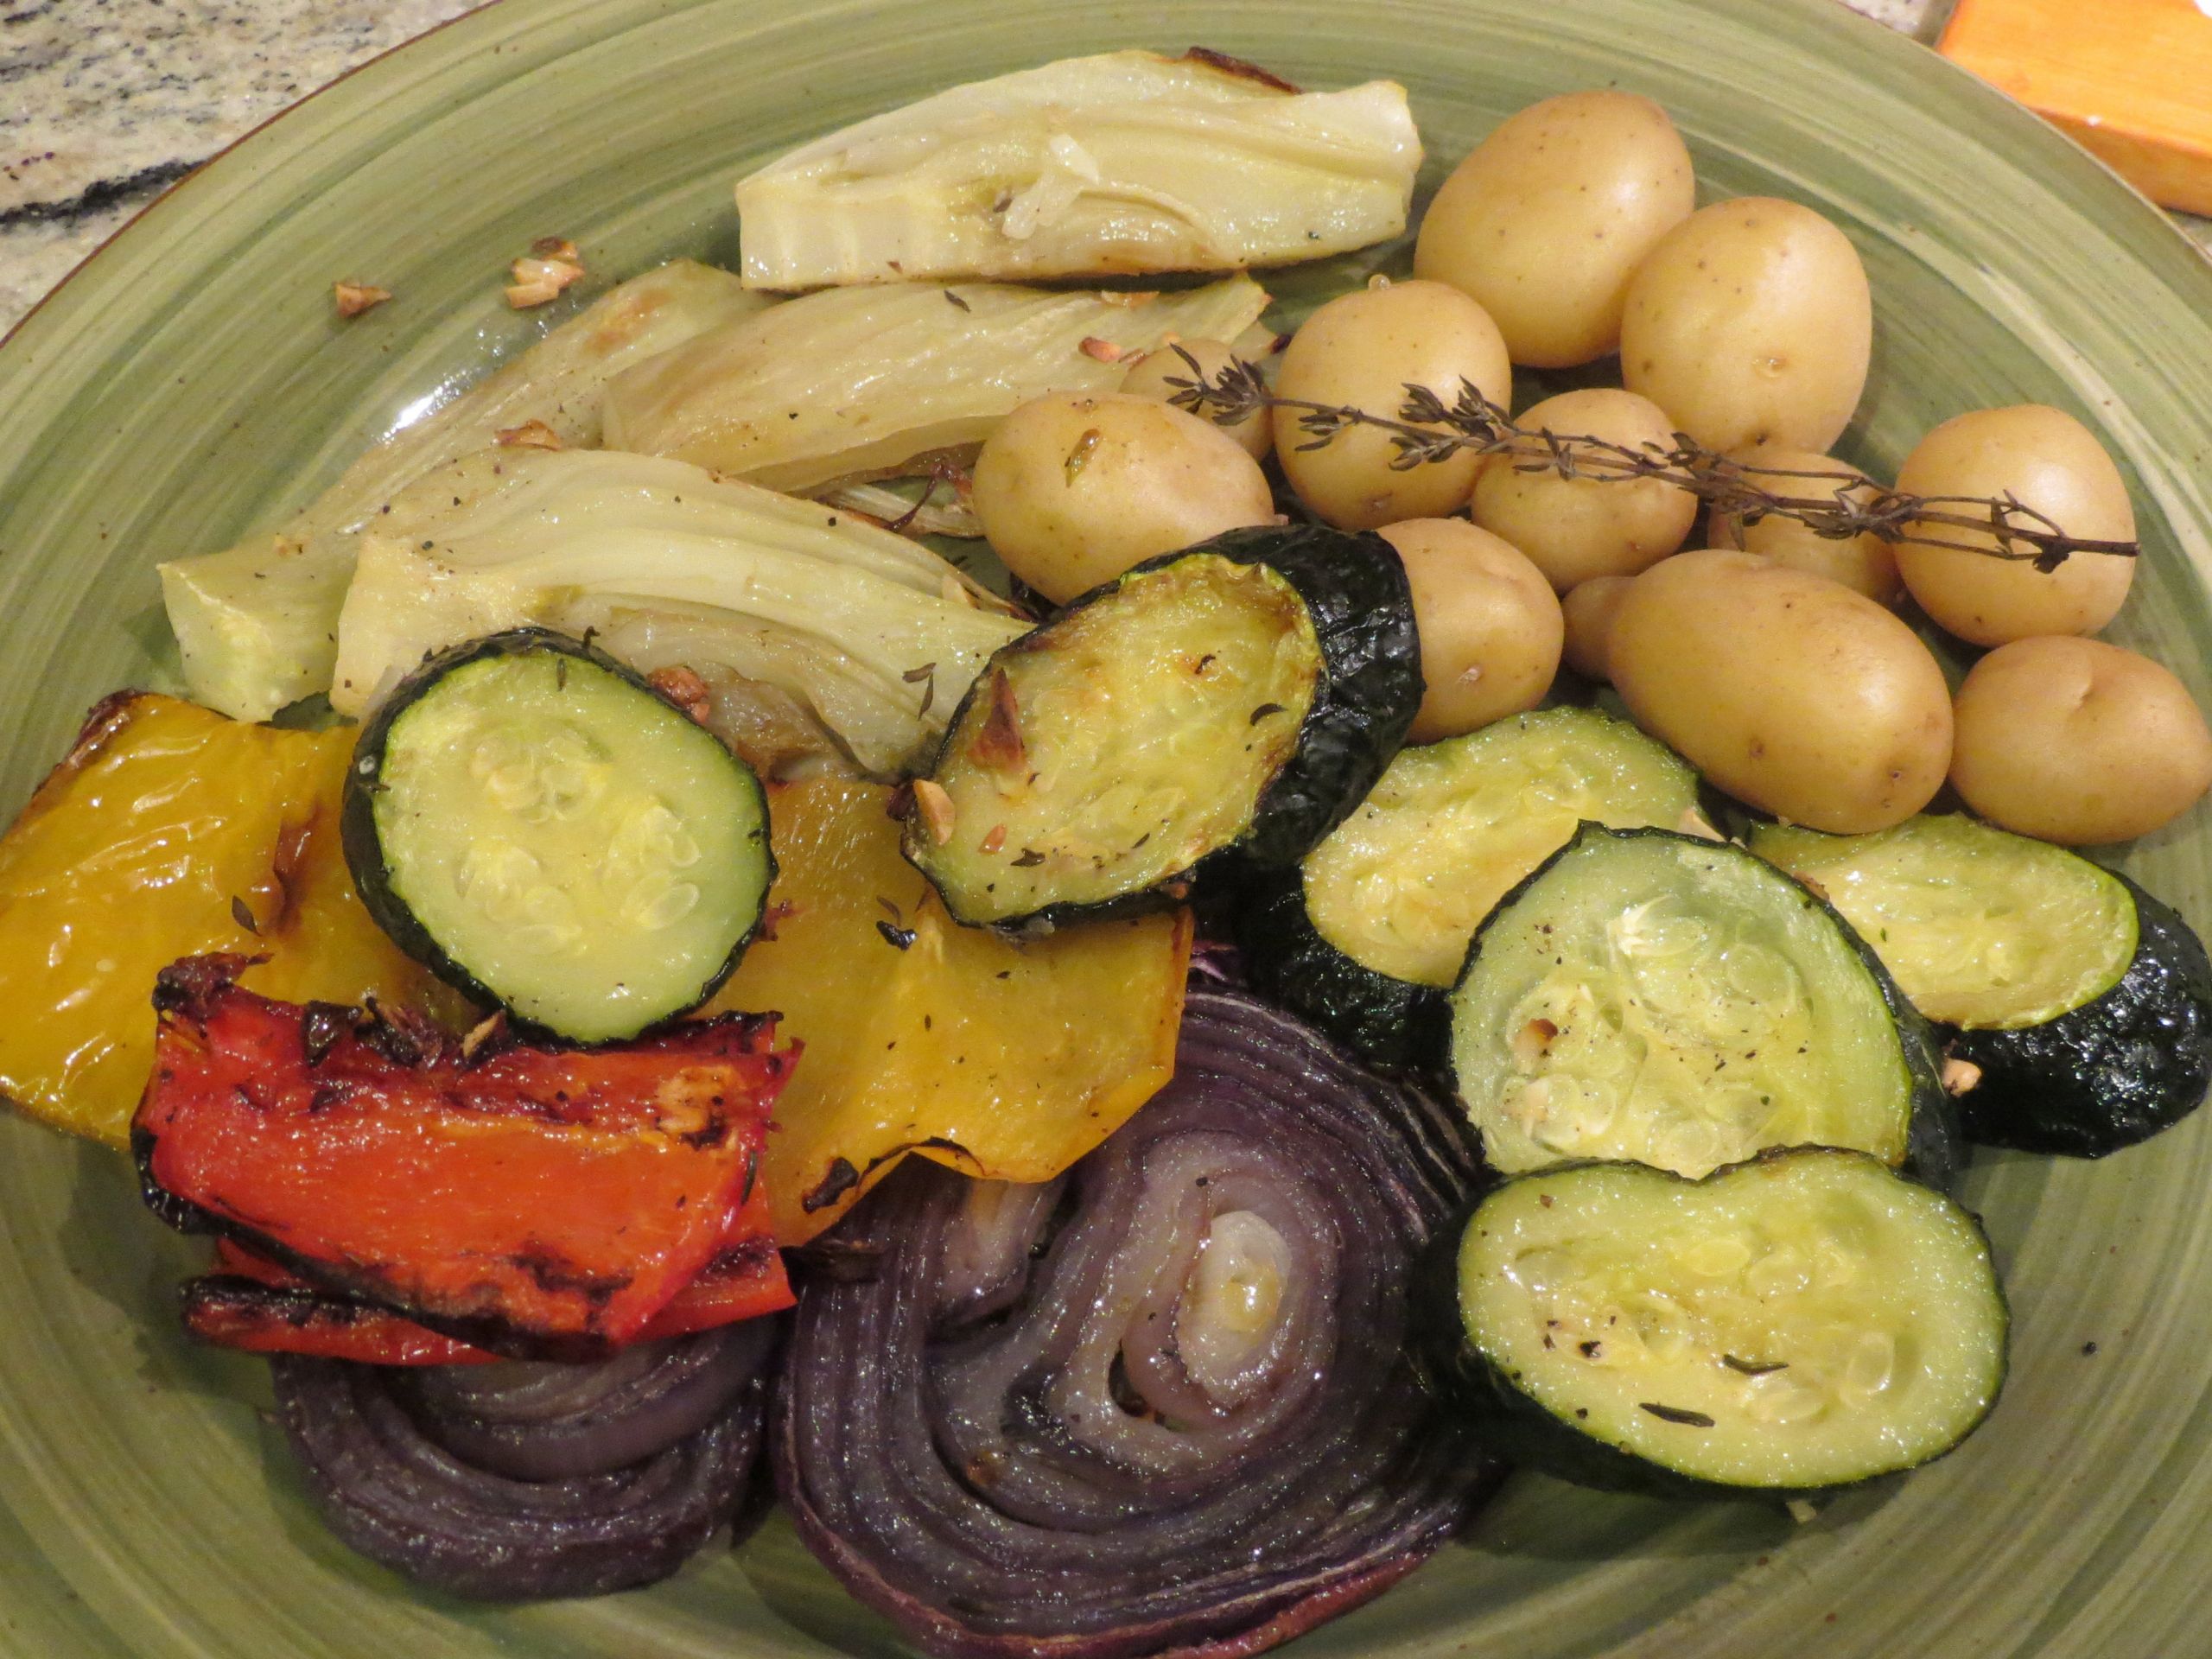 Roasted Vegetables Barefoot Contessa
 The 20 Best Ideas for Roasted Ve ables Barefoot Contessa